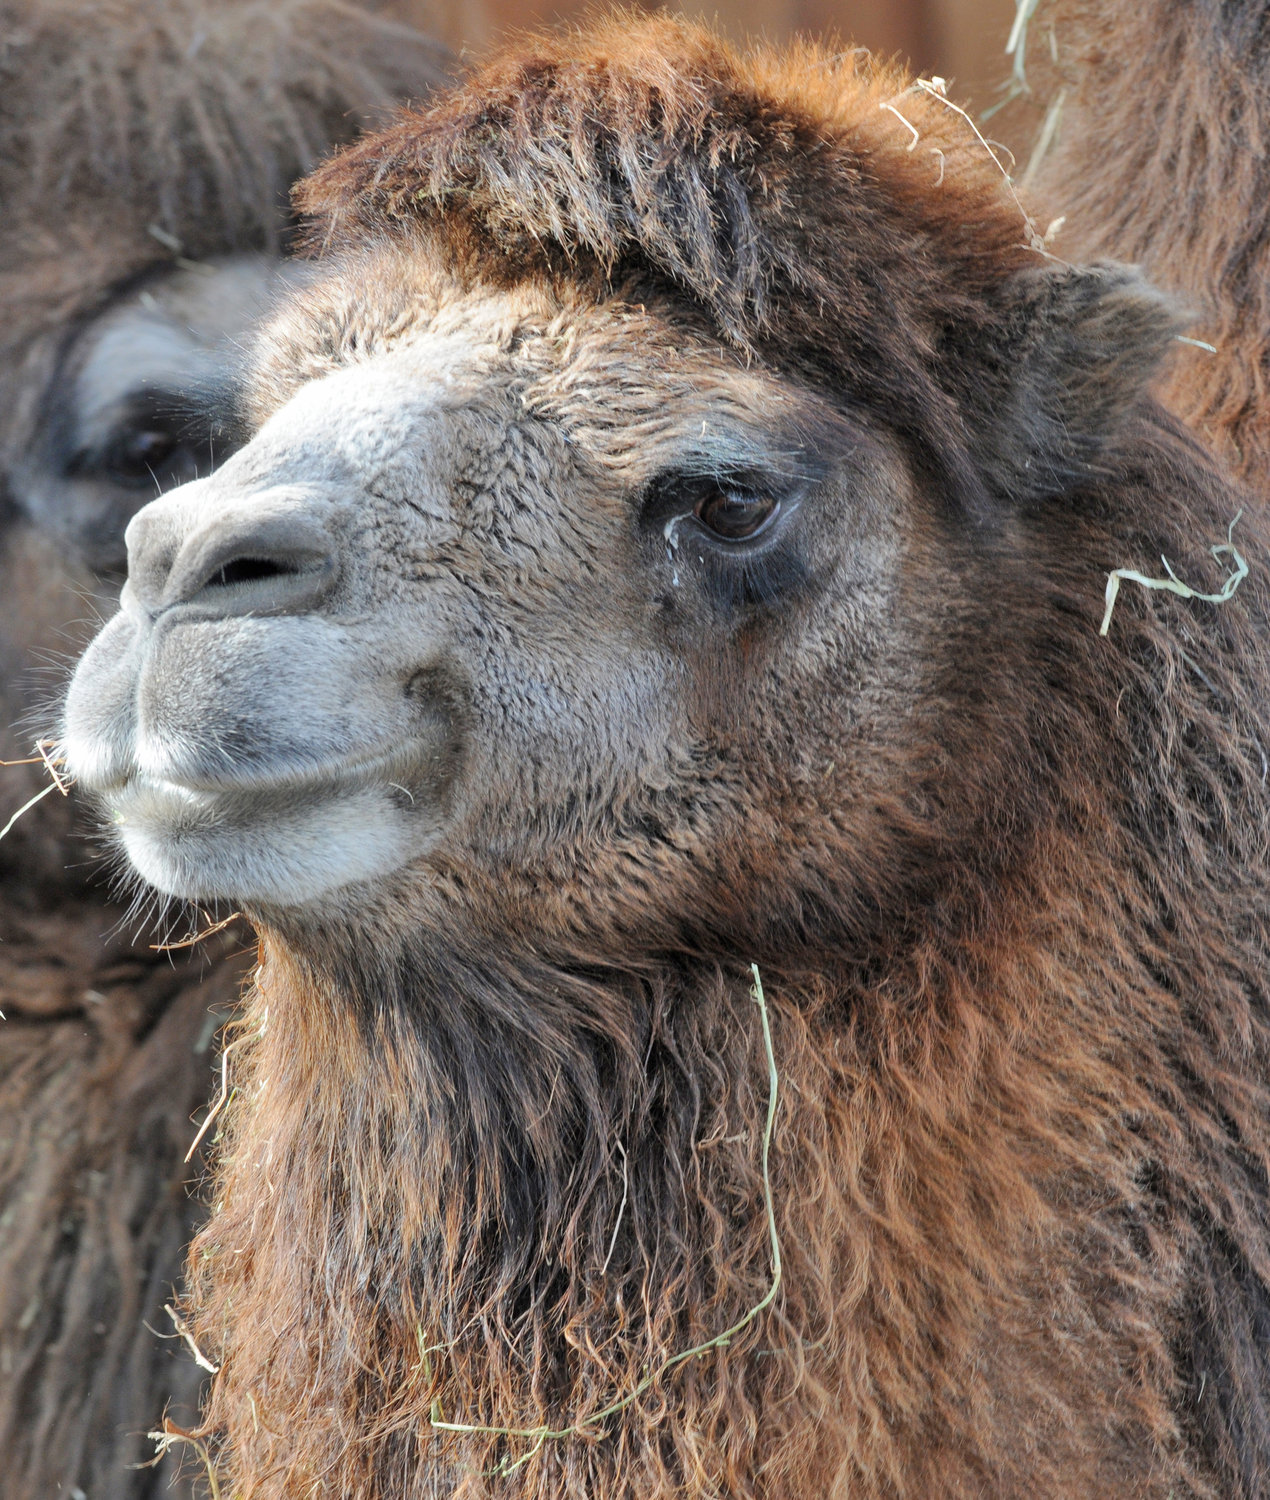 A Bactrian Camel on display at the Utica Zoo.